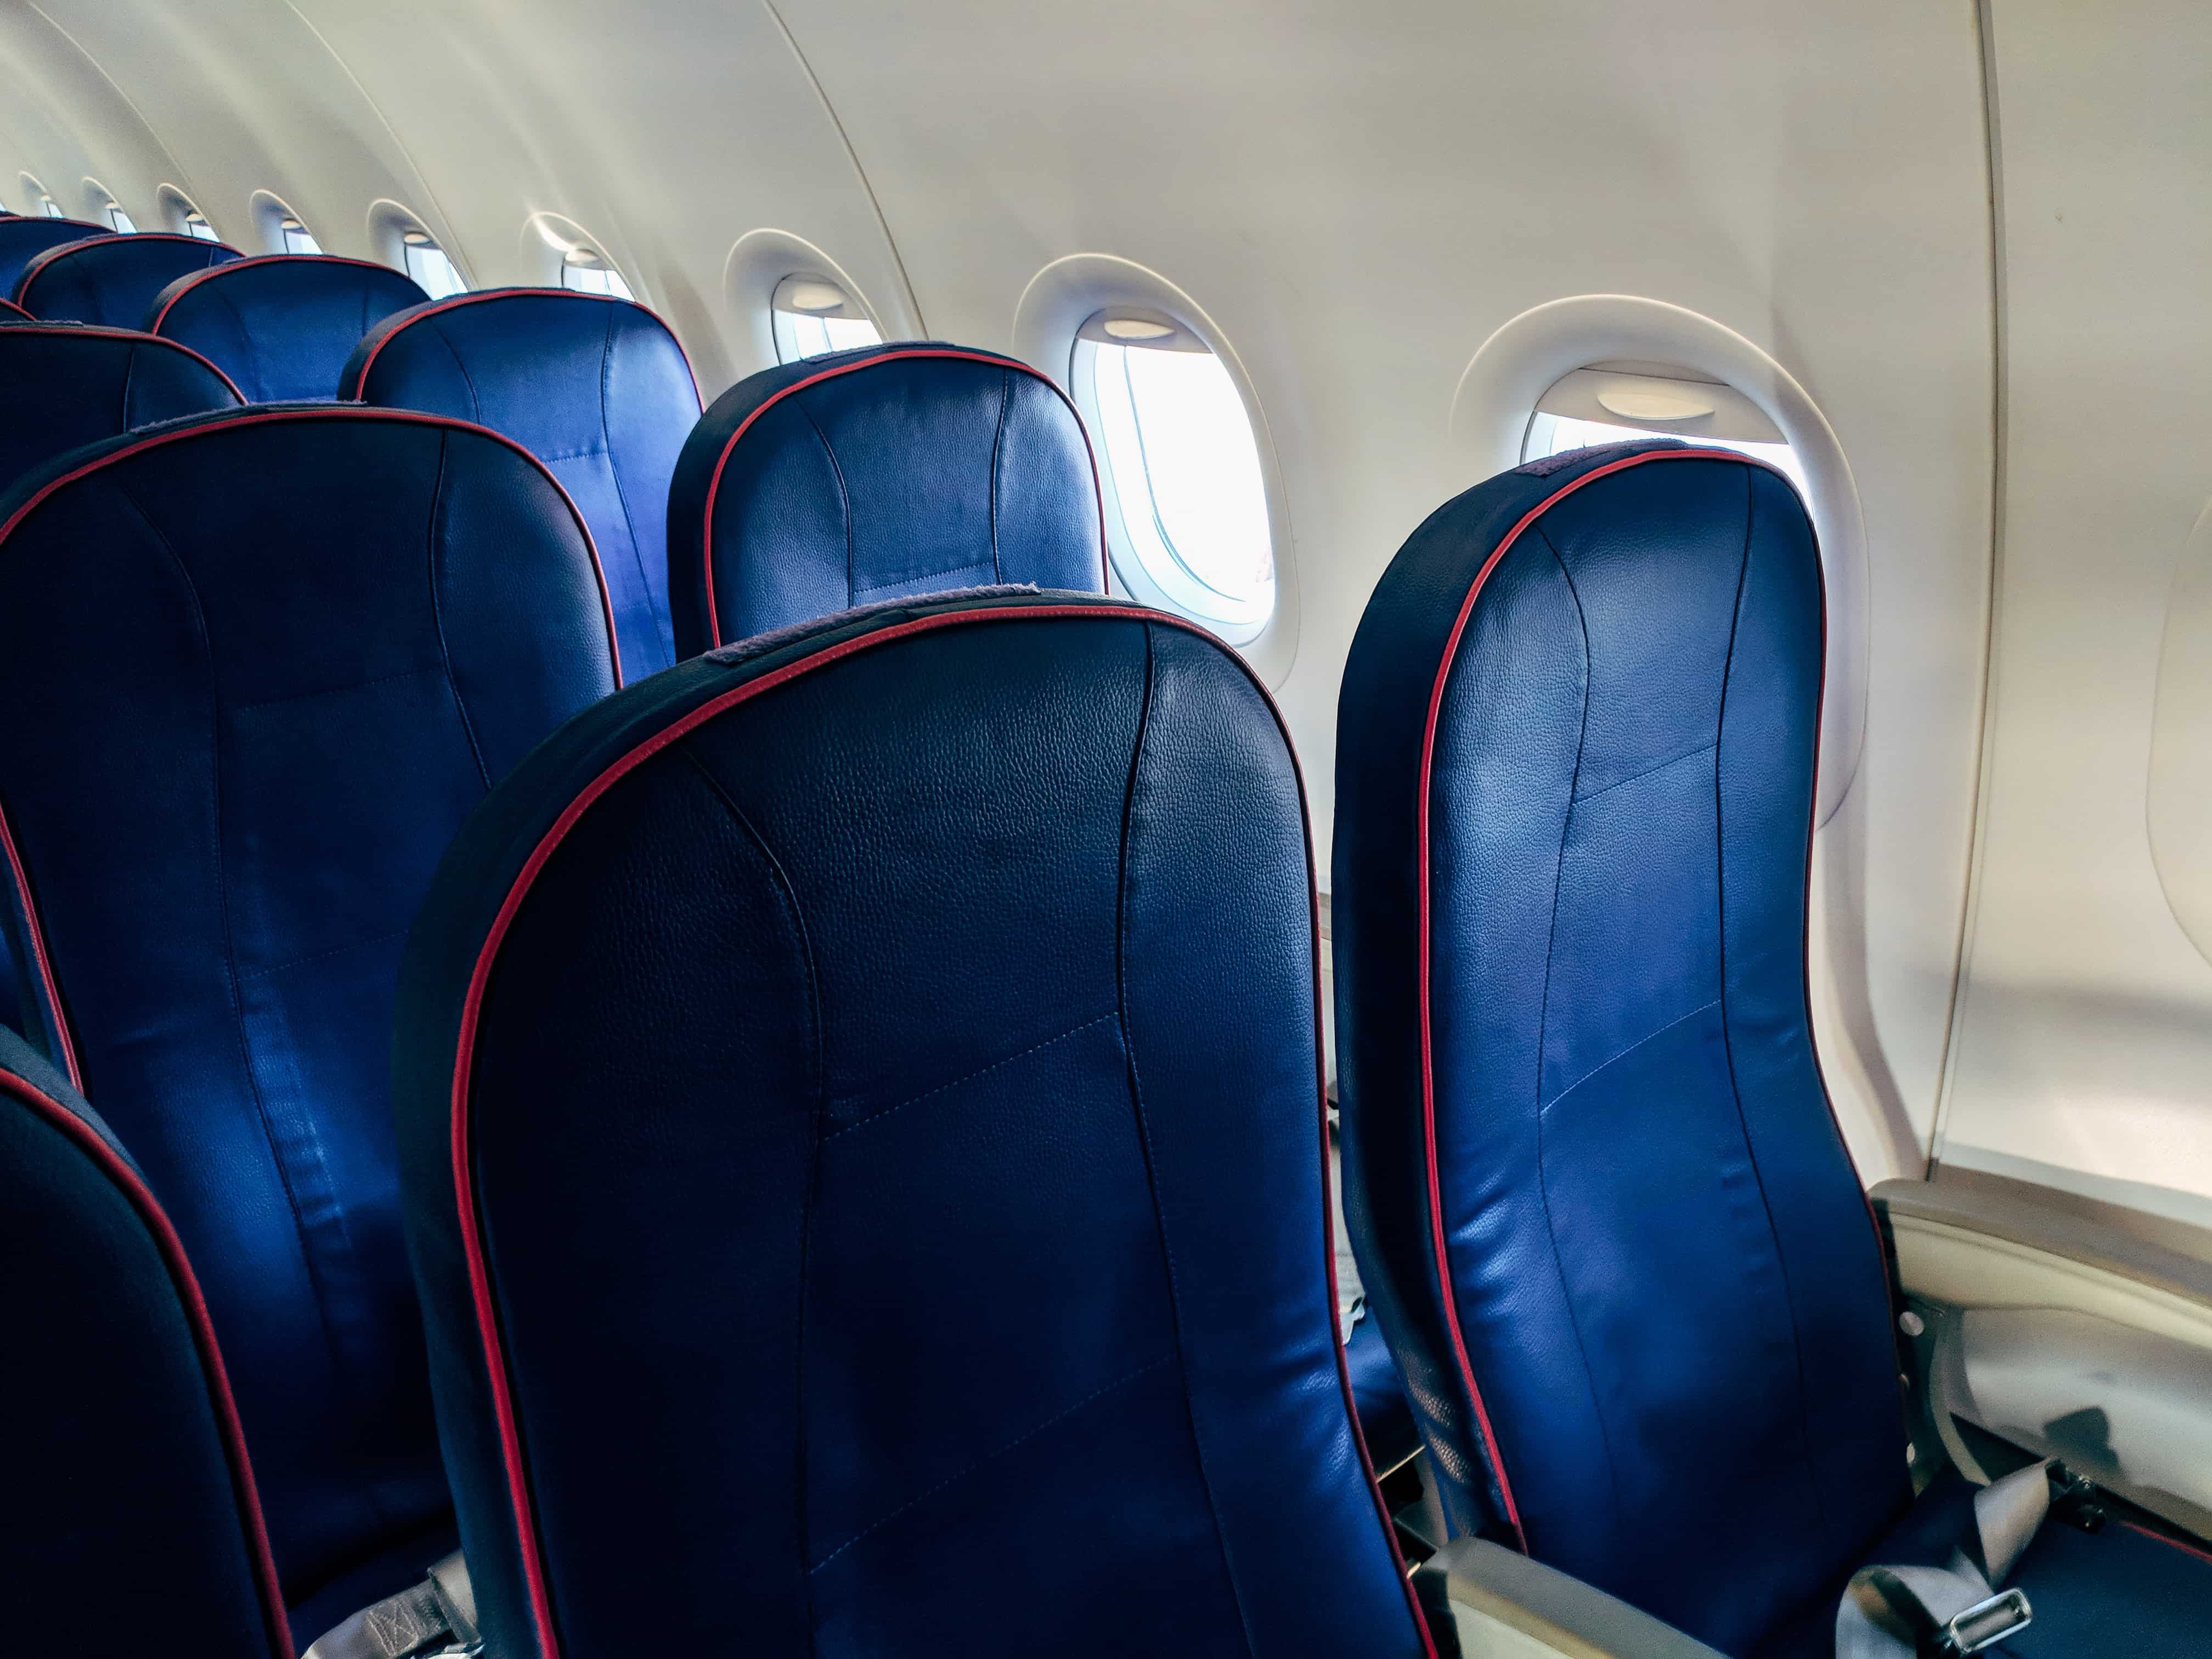 plus-size passengers receive free extra seats on airplanes?